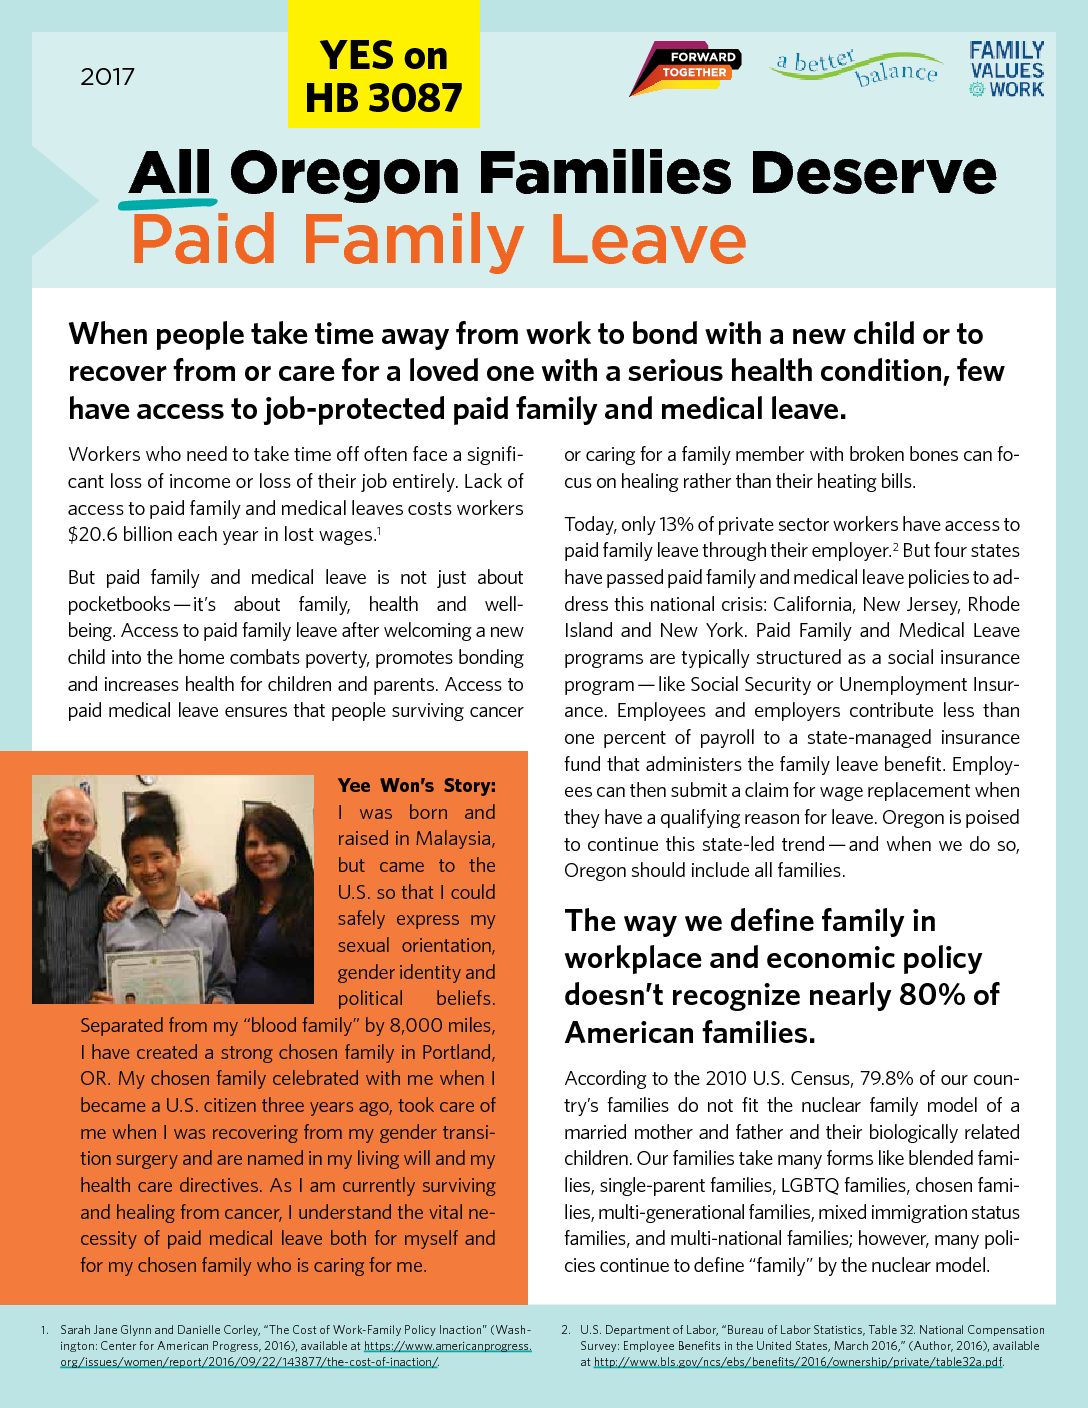 All Oregon Families Deserve Paid Family Leave Forward Together